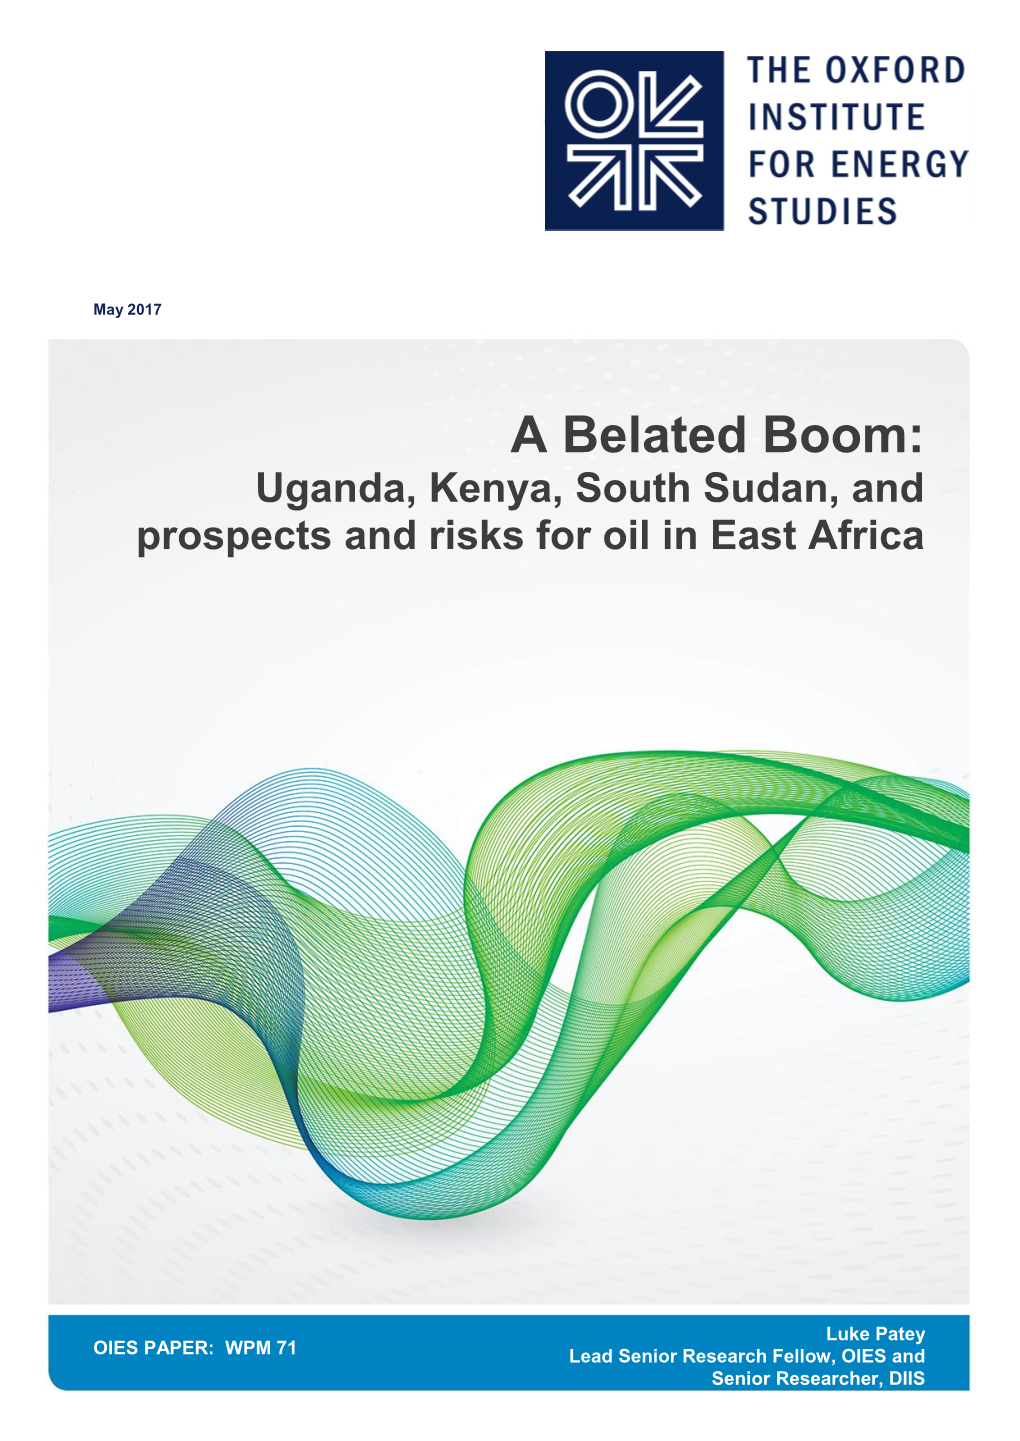 Belated Boom: Uganda, Kenya, South Sudan, and Prospects and Risks for Oil in East Africa